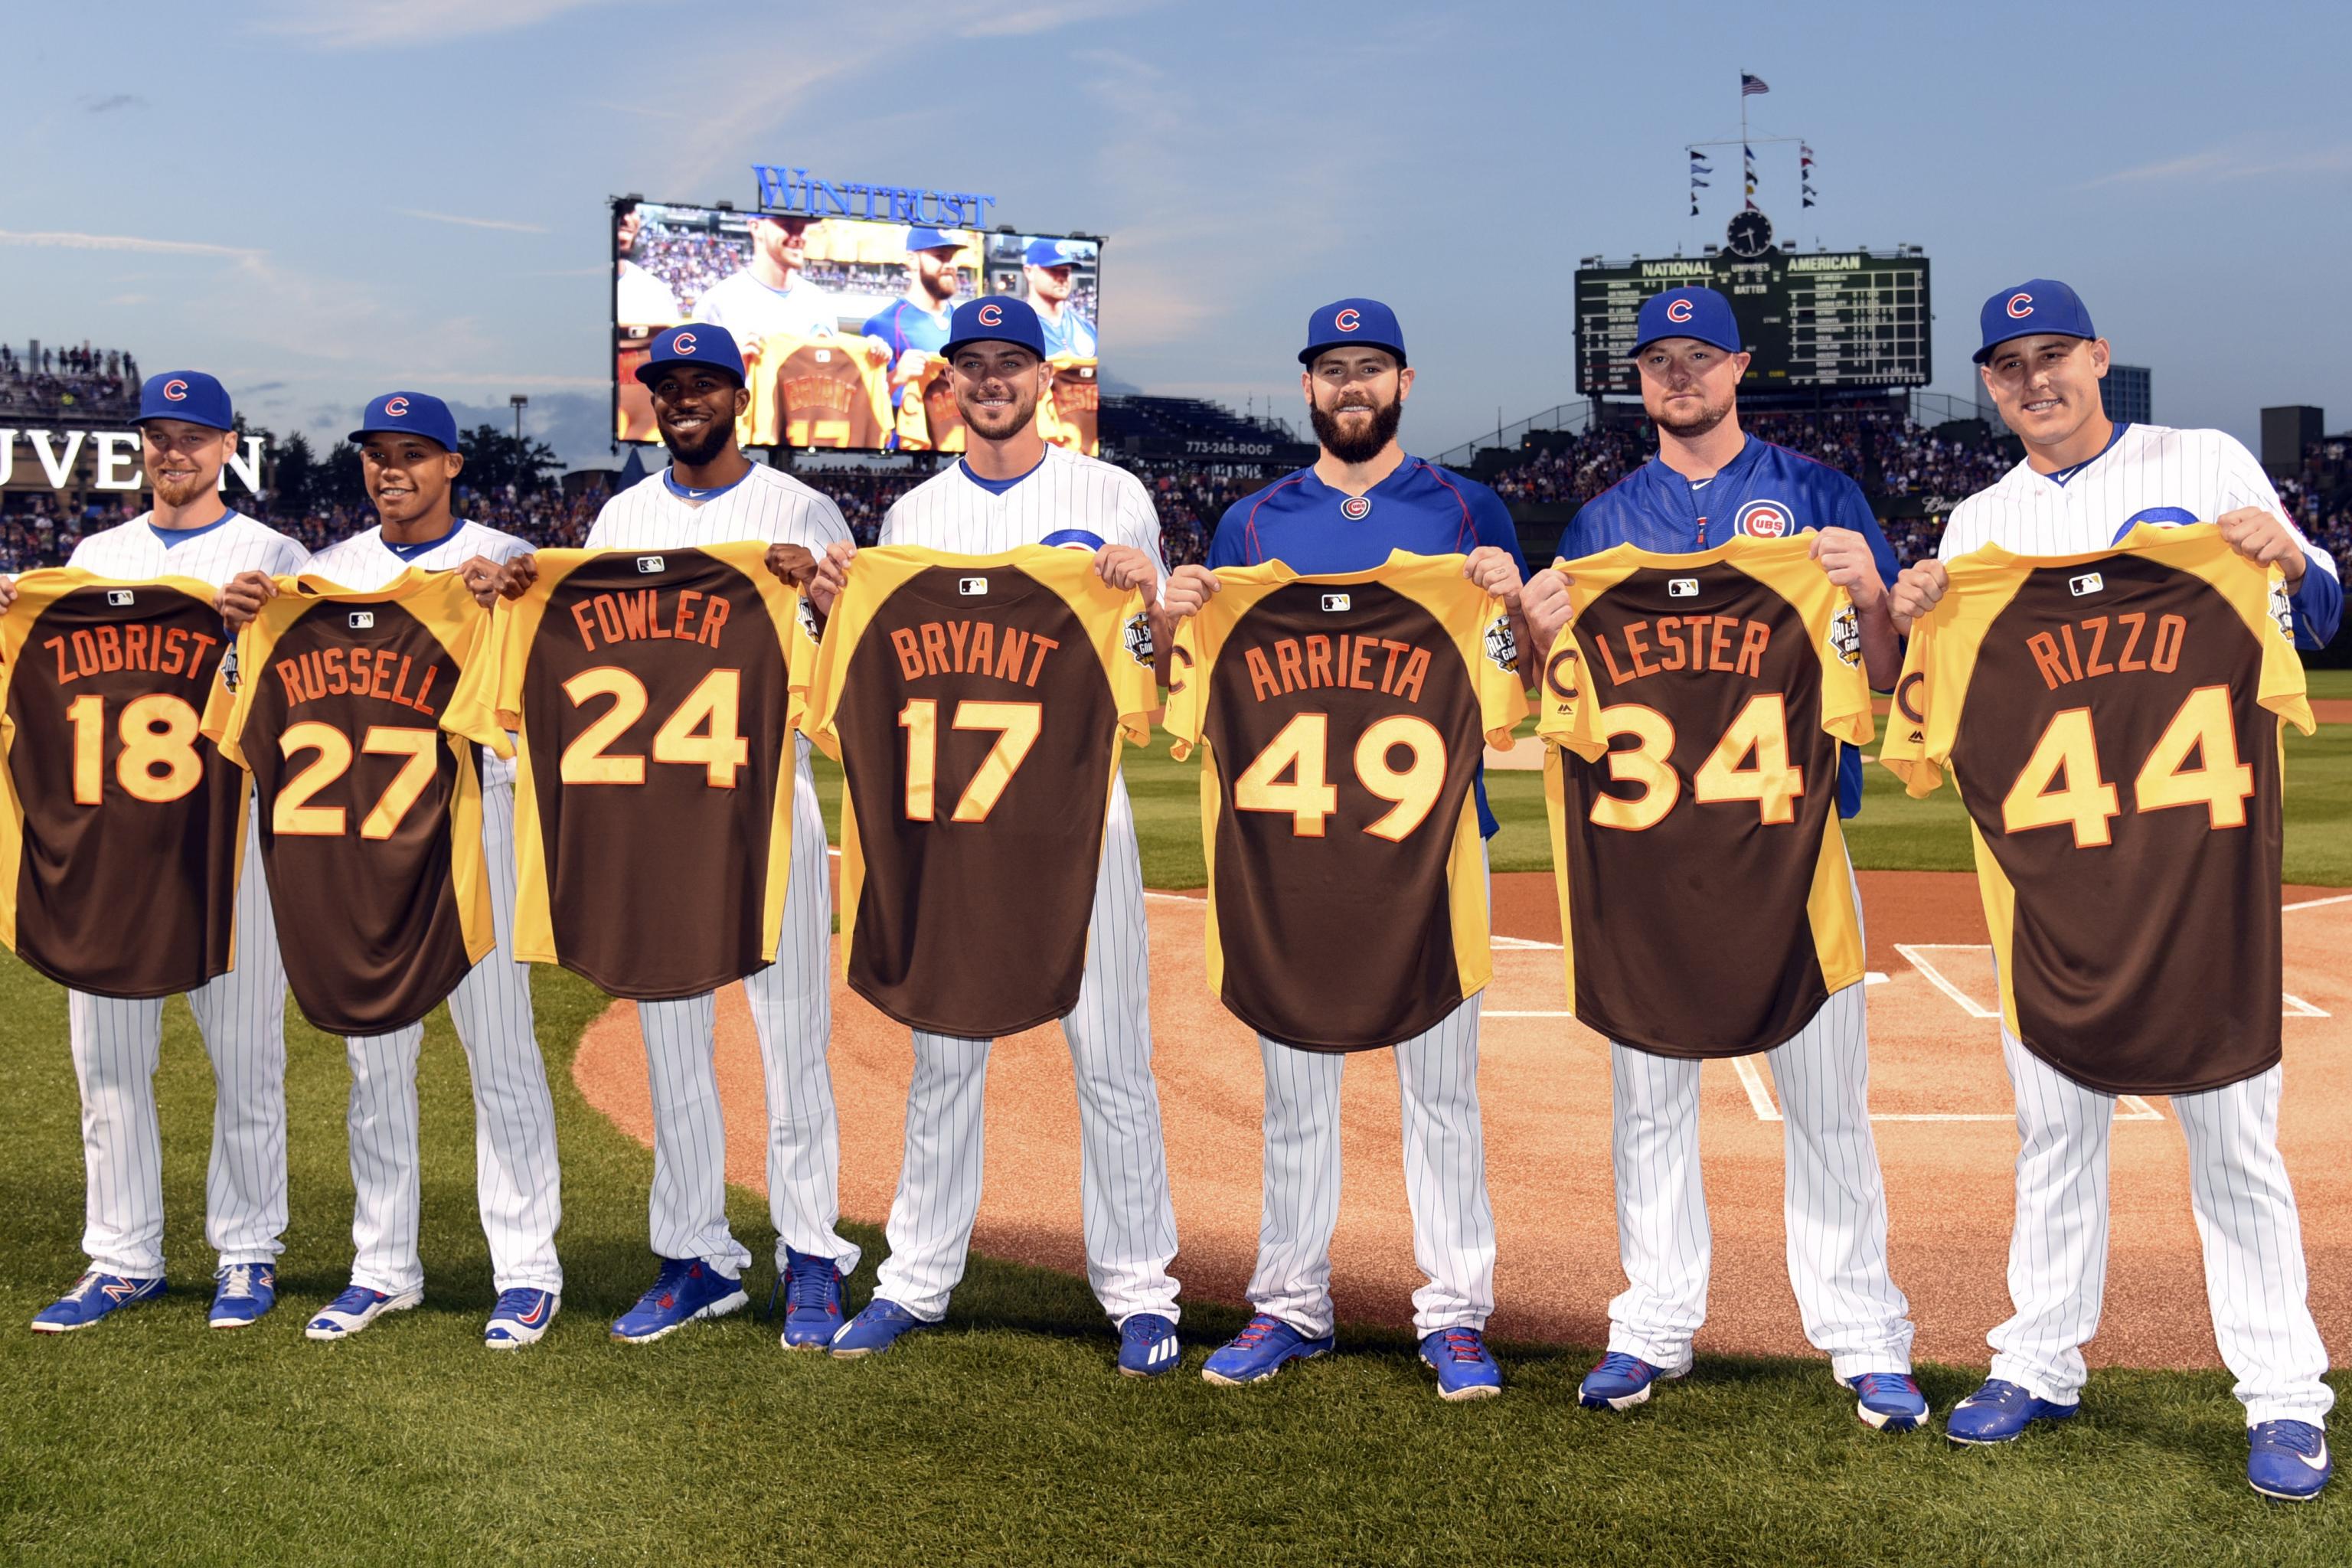 See The 2016 MLB Special Event Uniforms